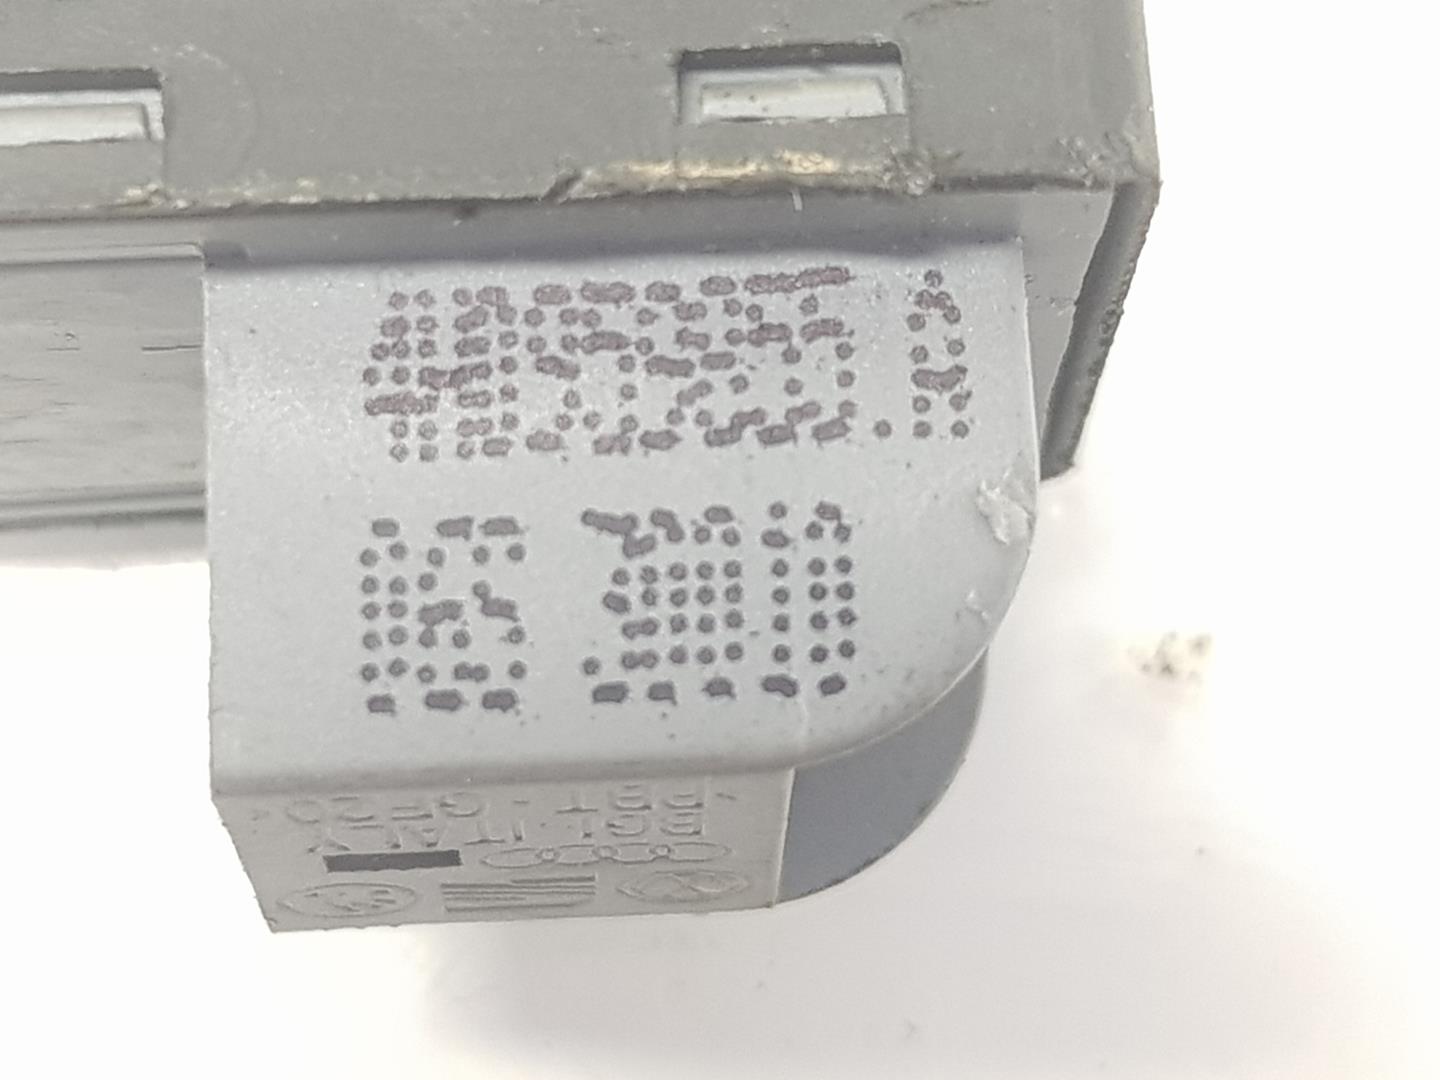 AUDI A7 C7/4G (2010-2020) Rear Right Door Window Control Switch 4H0959855A, 4H0959855A 19803832